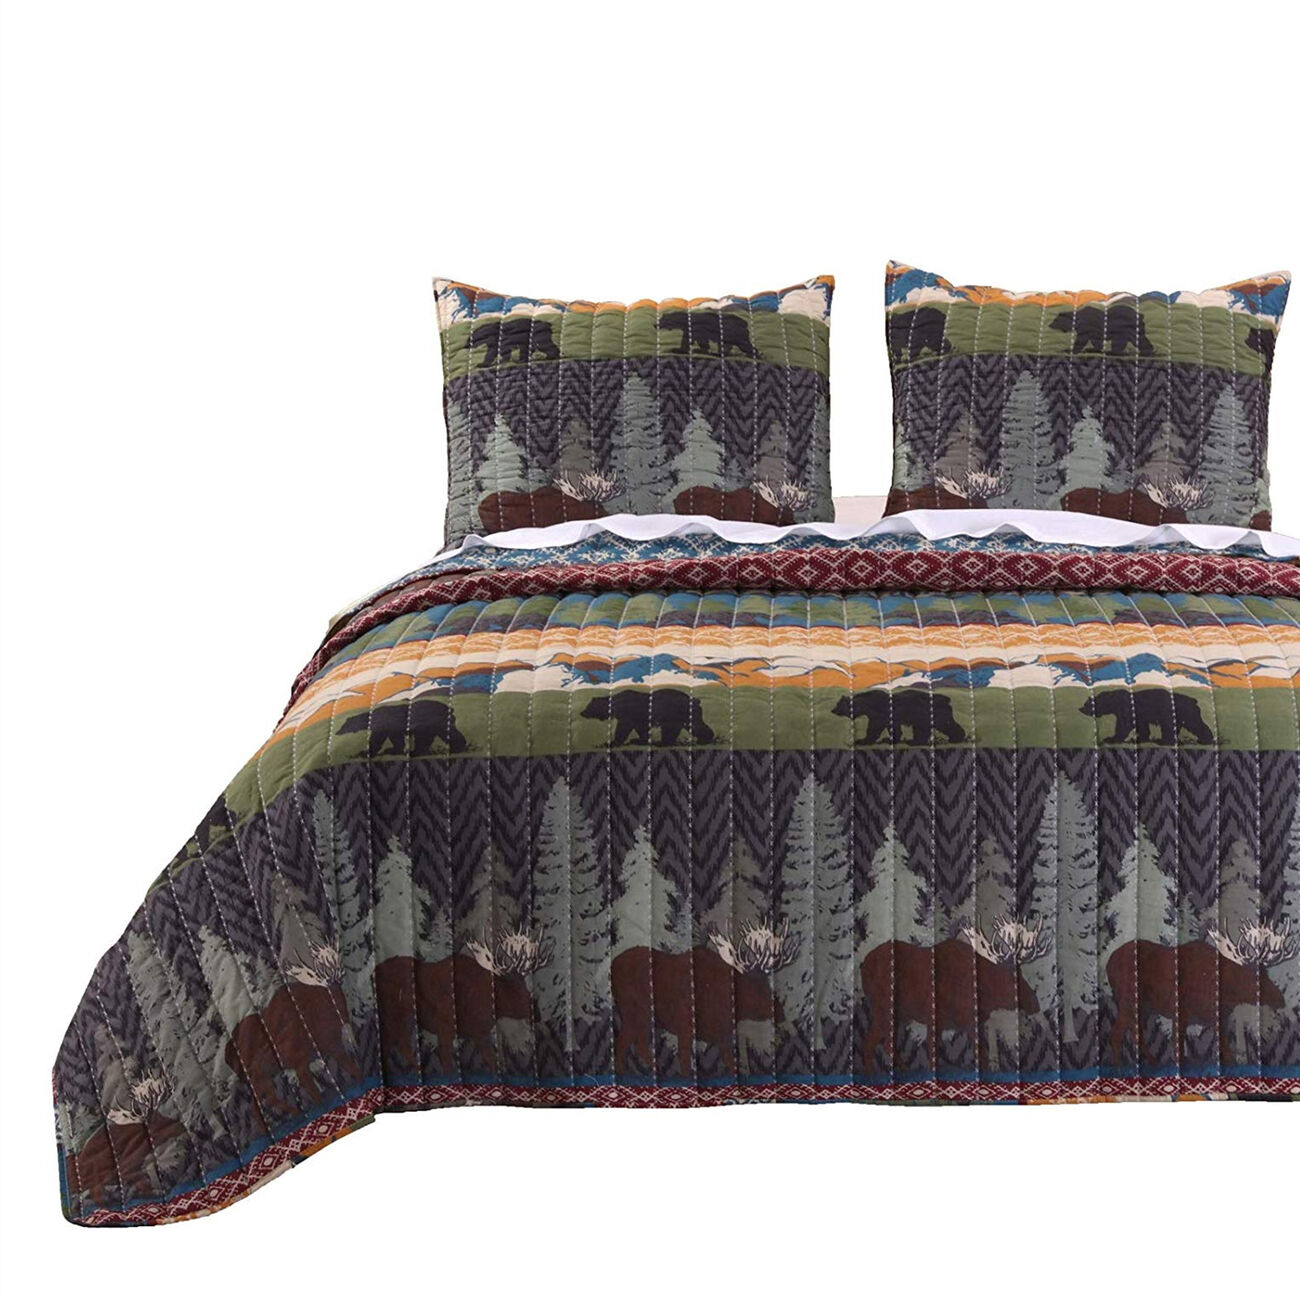 3 Piece Full Size Quilt Set with Nature Inspired Print, Multicolor